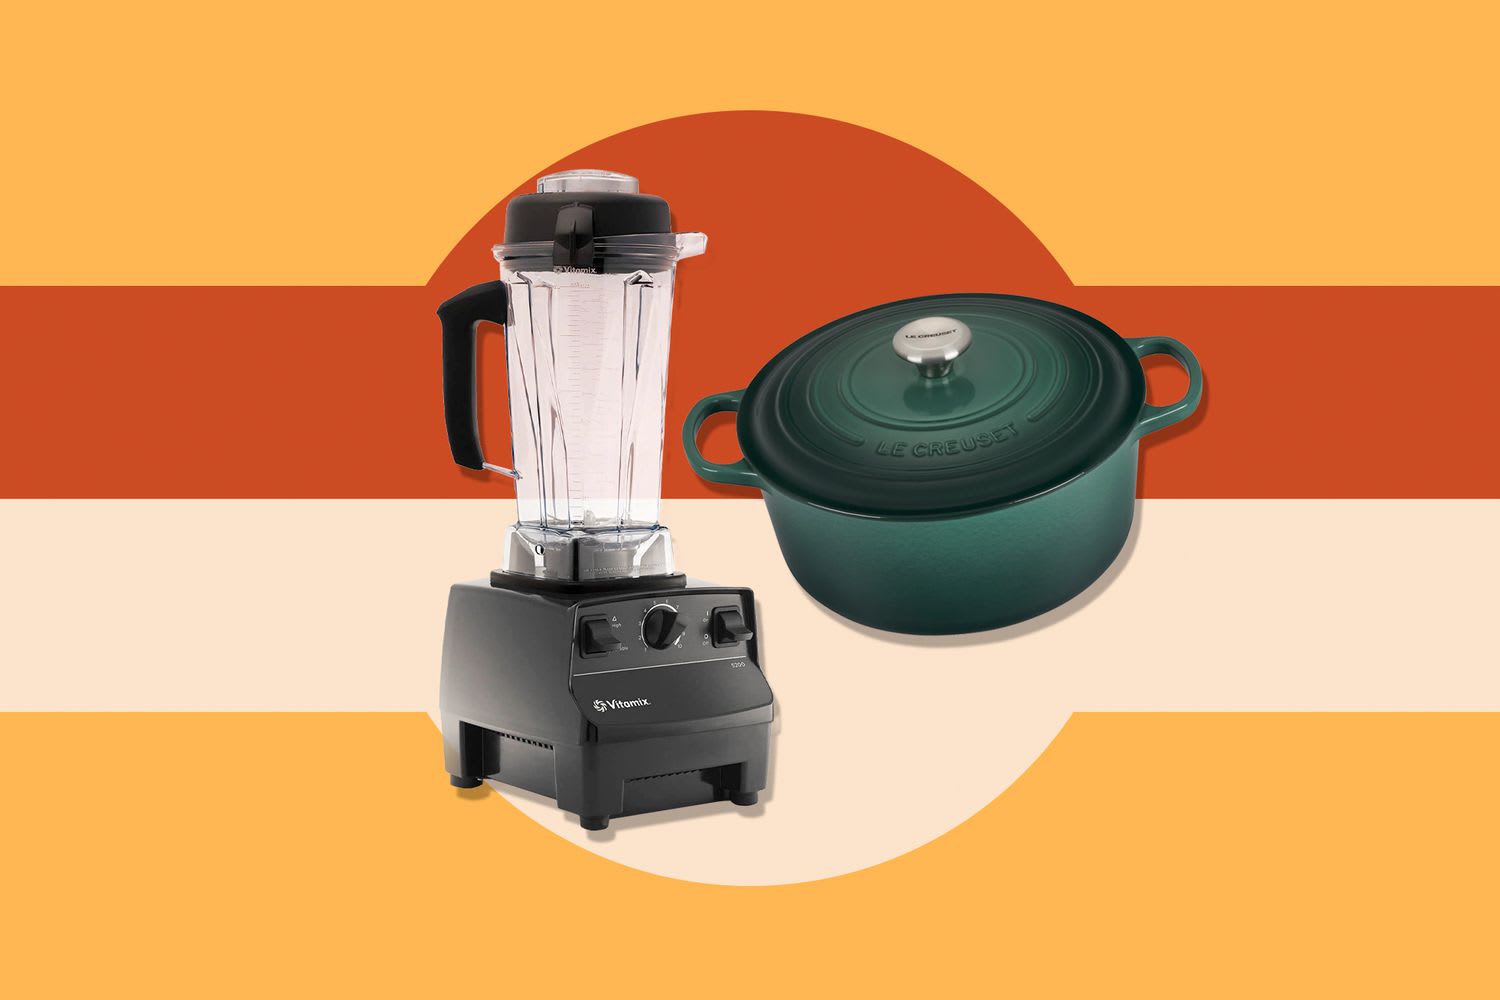 The Best Kitchen Tools and Appliances That Are Worth the Splurge